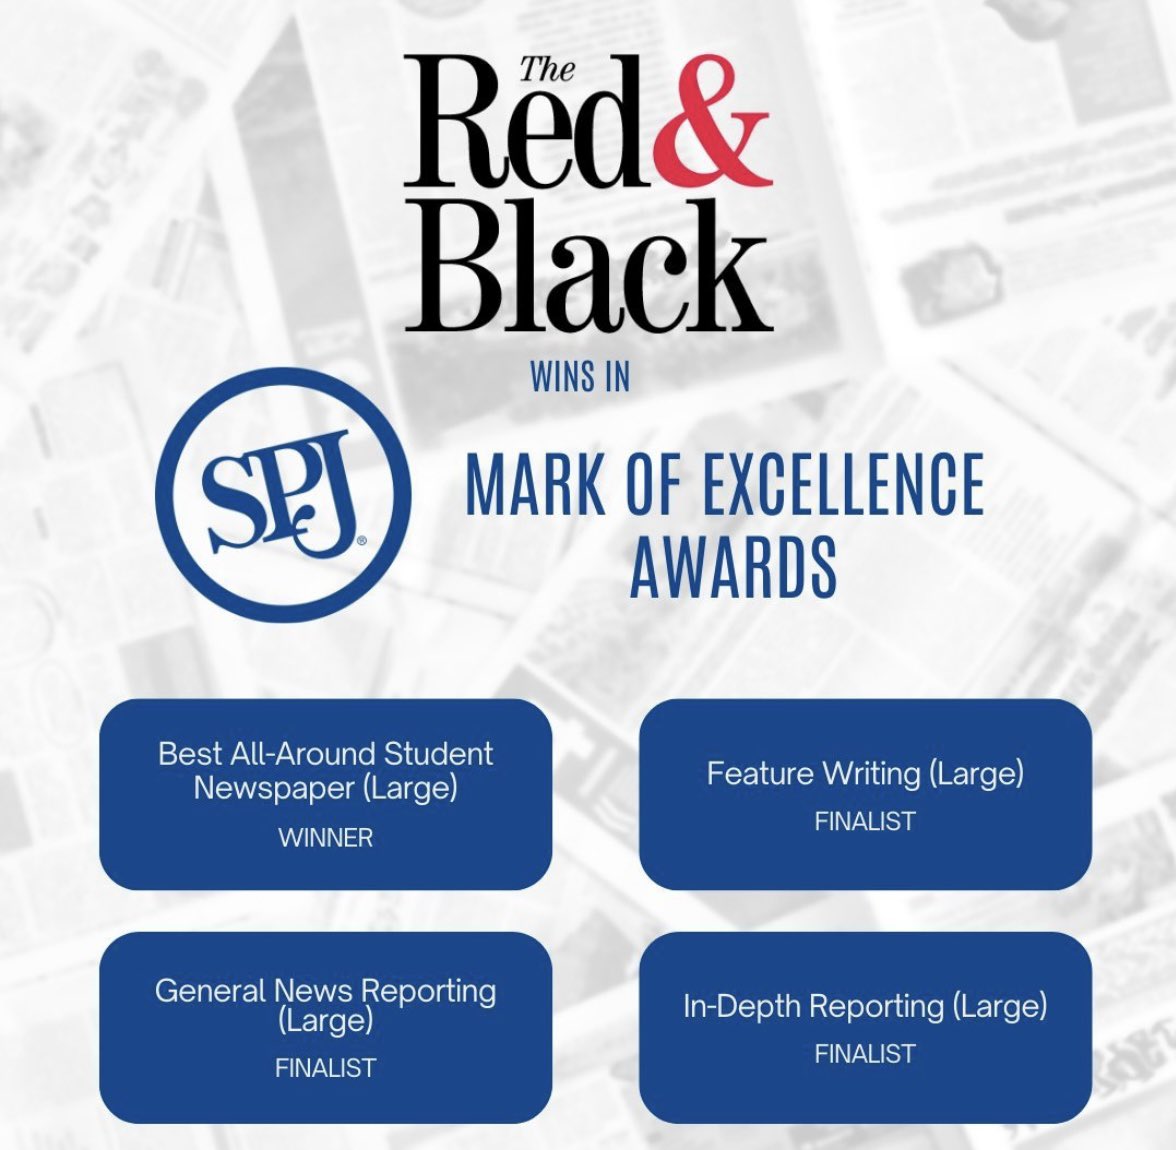 Congratulations to @redandblack for winning big in this year’s @spj_tweets Mark of Excellence awards for Region 3! spj.org/news.asp?REF=3…